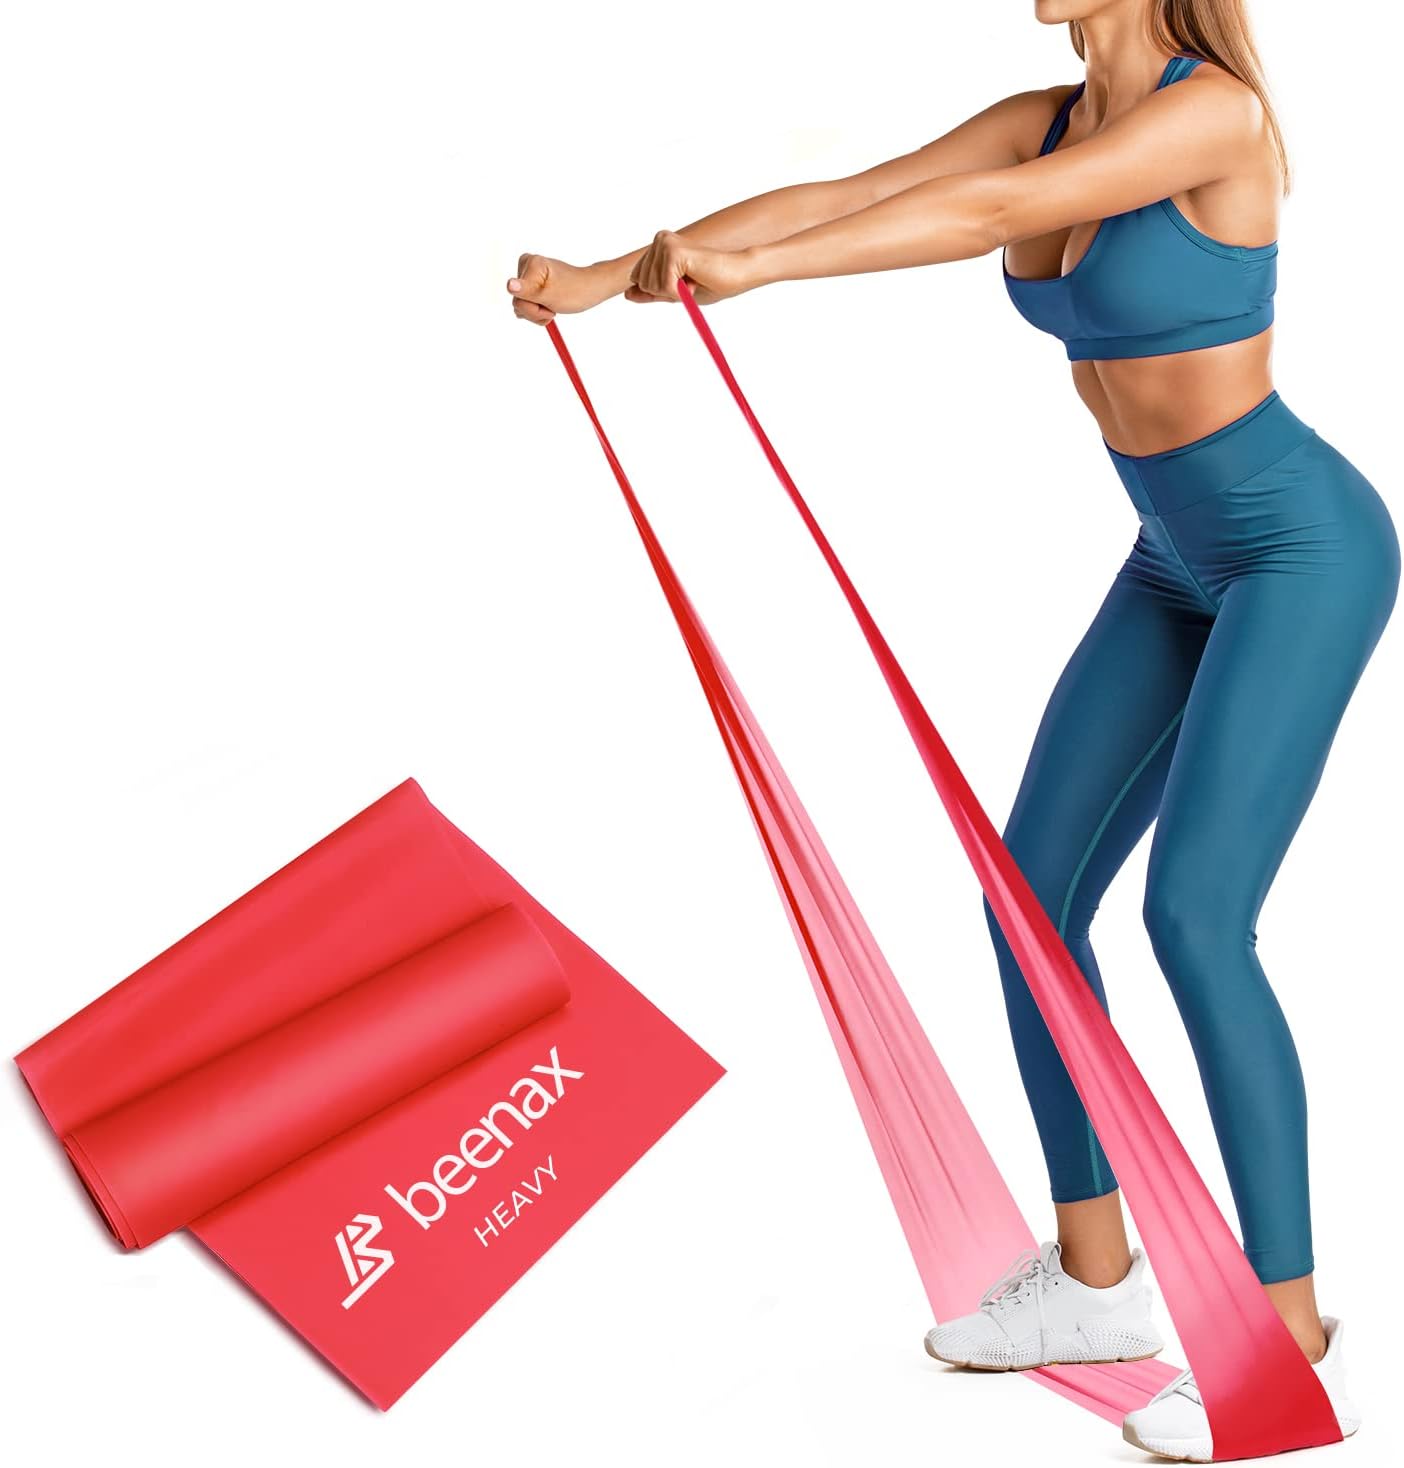 Beenax Resistance Bands - Exercise Bands to Build Muscle, Flexibility, Strength for Pilates, Yoga, Rehab, Stretching, Fitness, Gym, Physio, Strength Training and Workout - Men  Women